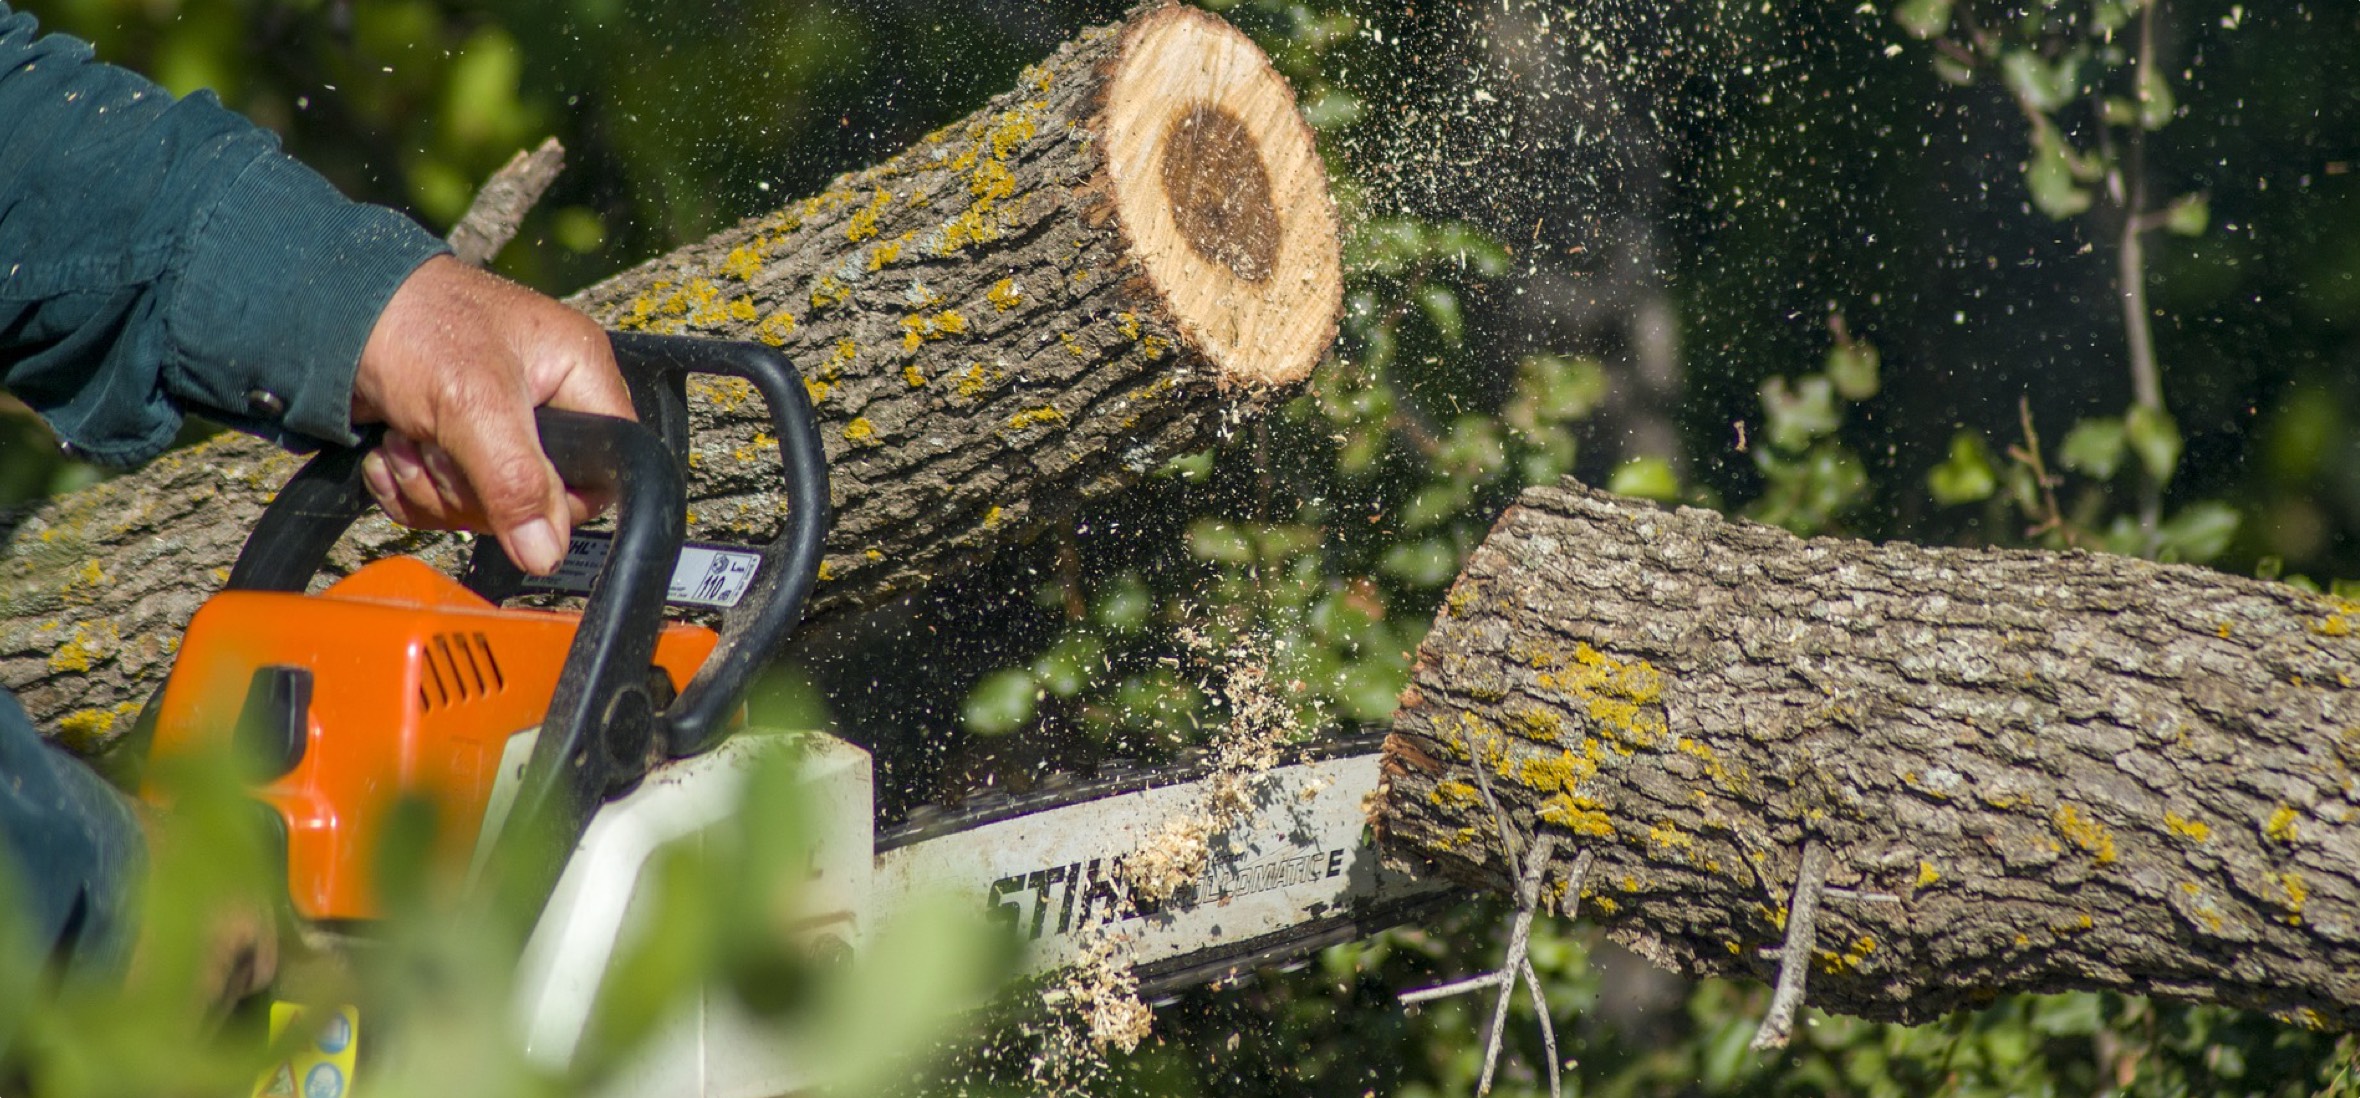 Towsend Arborcare offers a number of landscaping and tree trimming services from professional arborists.